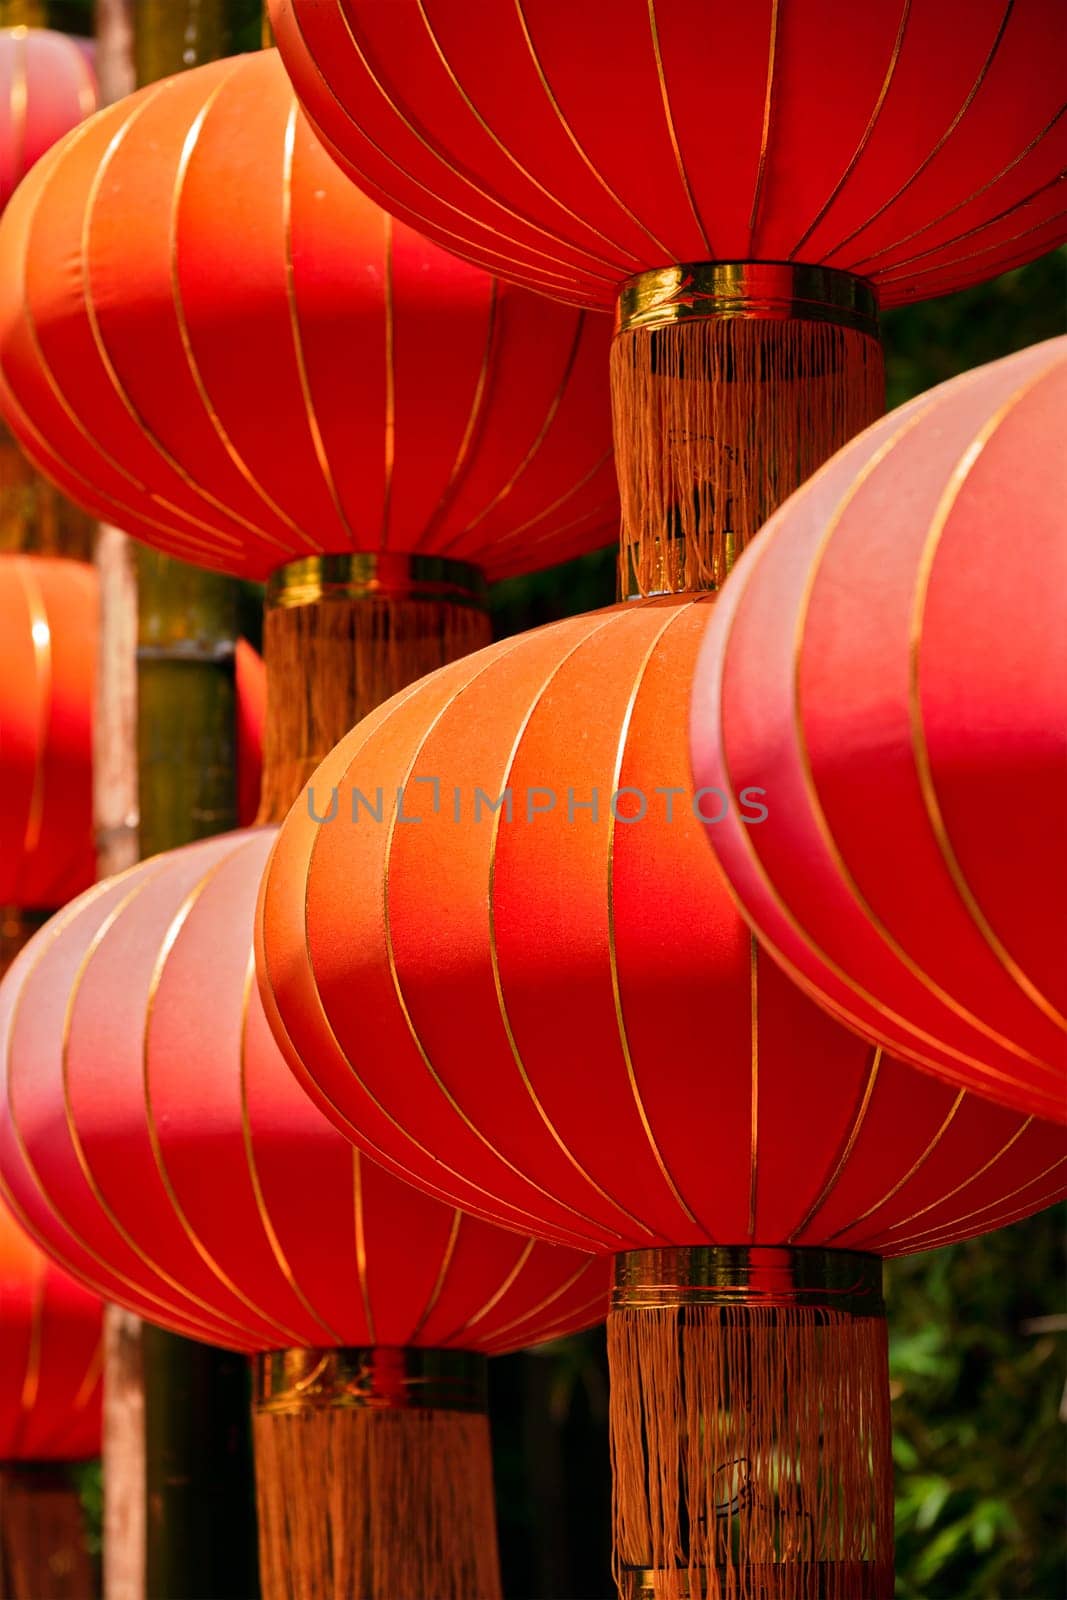 Chinese traditional lanterns by dimol